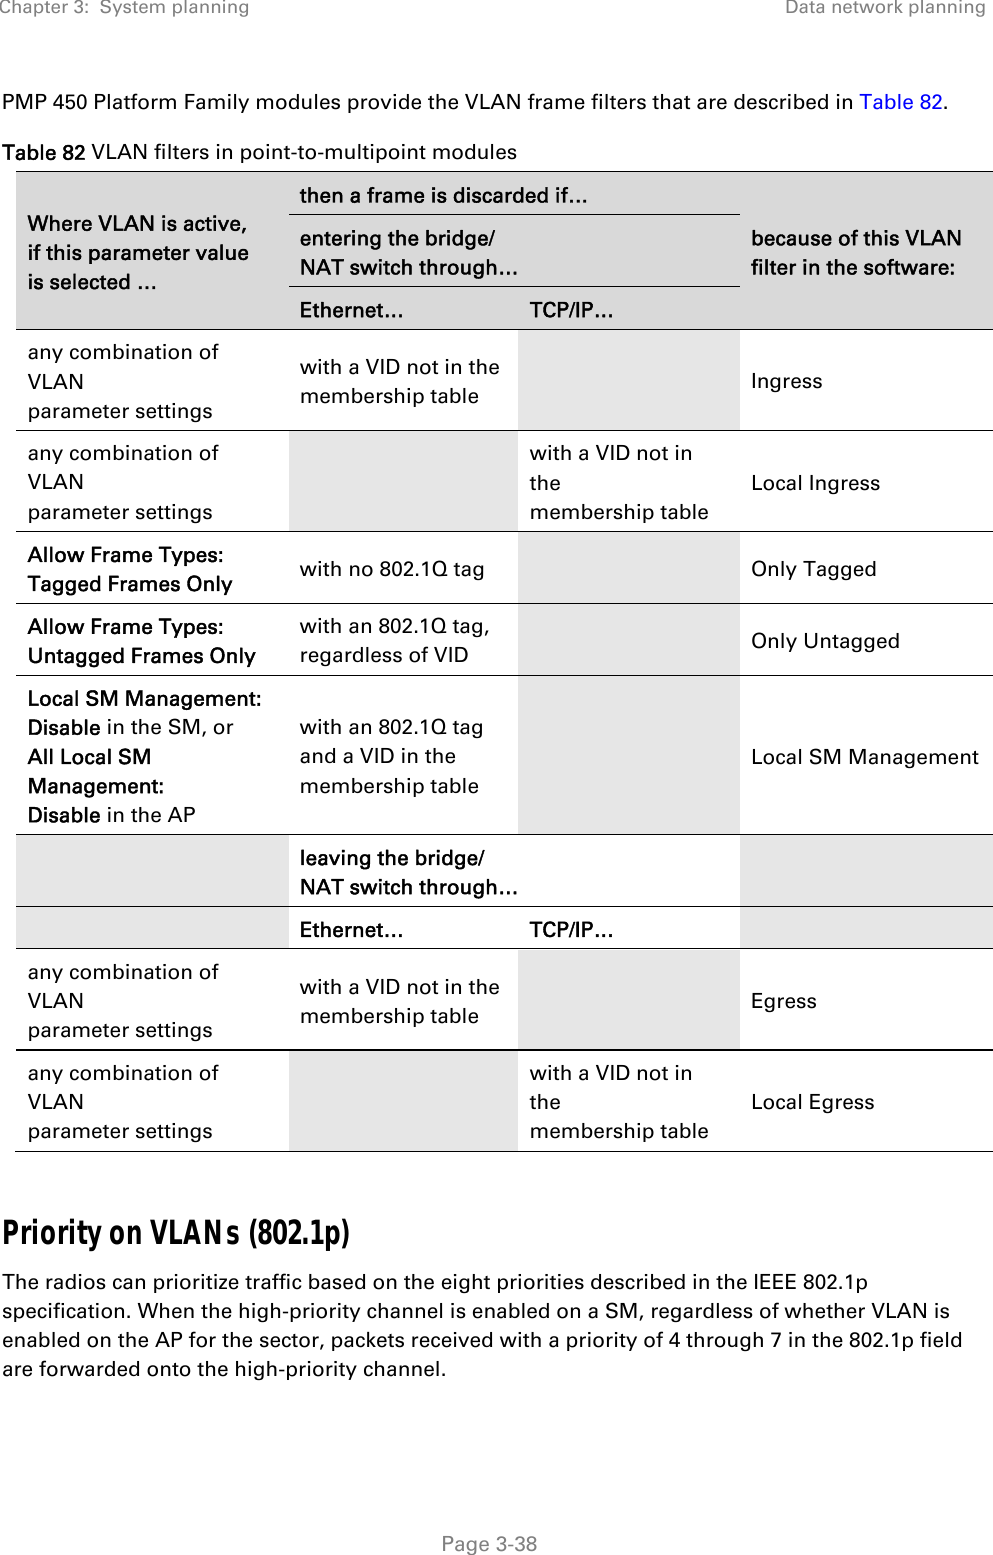 Chapter 3:  System planning  Data network planning   Page 3-38 PMP 450 Platform Family modules provide the VLAN frame filters that are described in Table 82. Table 82 VLAN filters in point-to-multipoint modules Where VLAN is active, if this parameter value is selected … then a frame is discarded if… because of this VLAN filter in the software: entering the bridge/  NAT switch through… Ethernet…  TCP/IP… any combination of VLAN parameter settings with a VID not in the membership table   Ingress any combination of VLAN parameter settings  with a VID not in the membership table Local Ingress Allow Frame Types: Tagged Frames Only  with no 802.1Q tag   Only Tagged Allow Frame Types: Untagged Frames Only with an 802.1Q tag, regardless of VID   Only Untagged Local SM Management: Disable in the SM, or All Local SM Management: Disable in the AP with an 802.1Q tag and a VID in the membership table   Local SM Management  leaving the bridge/ NAT switch through…    Ethernet… TCP/IP…   any combination of VLAN parameter settings with a VID not in the membership table   Egress any combination of VLAN parameter settings  with a VID not in the membership table Local Egress  Priority on VLANs (802.1p) The radios can prioritize traffic based on the eight priorities described in the IEEE 802.1p specification. When the high-priority channel is enabled on a SM, regardless of whether VLAN is enabled on the AP for the sector, packets received with a priority of 4 through 7 in the 802.1p field are forwarded onto the high-priority channel. 